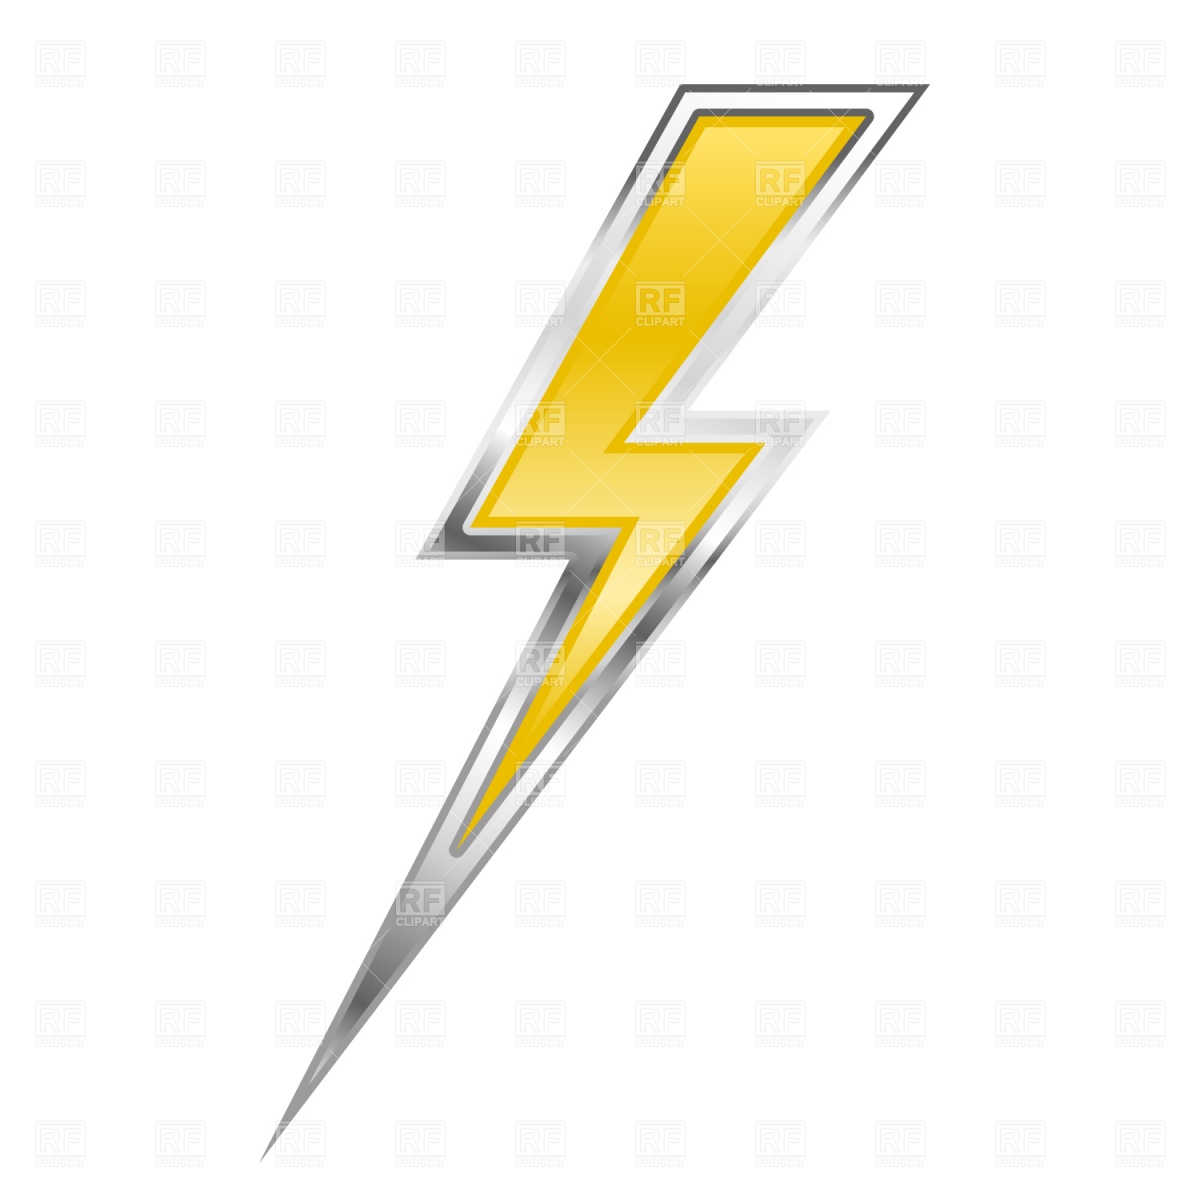 Lighting clipart electric charge. Lightning bolt x free